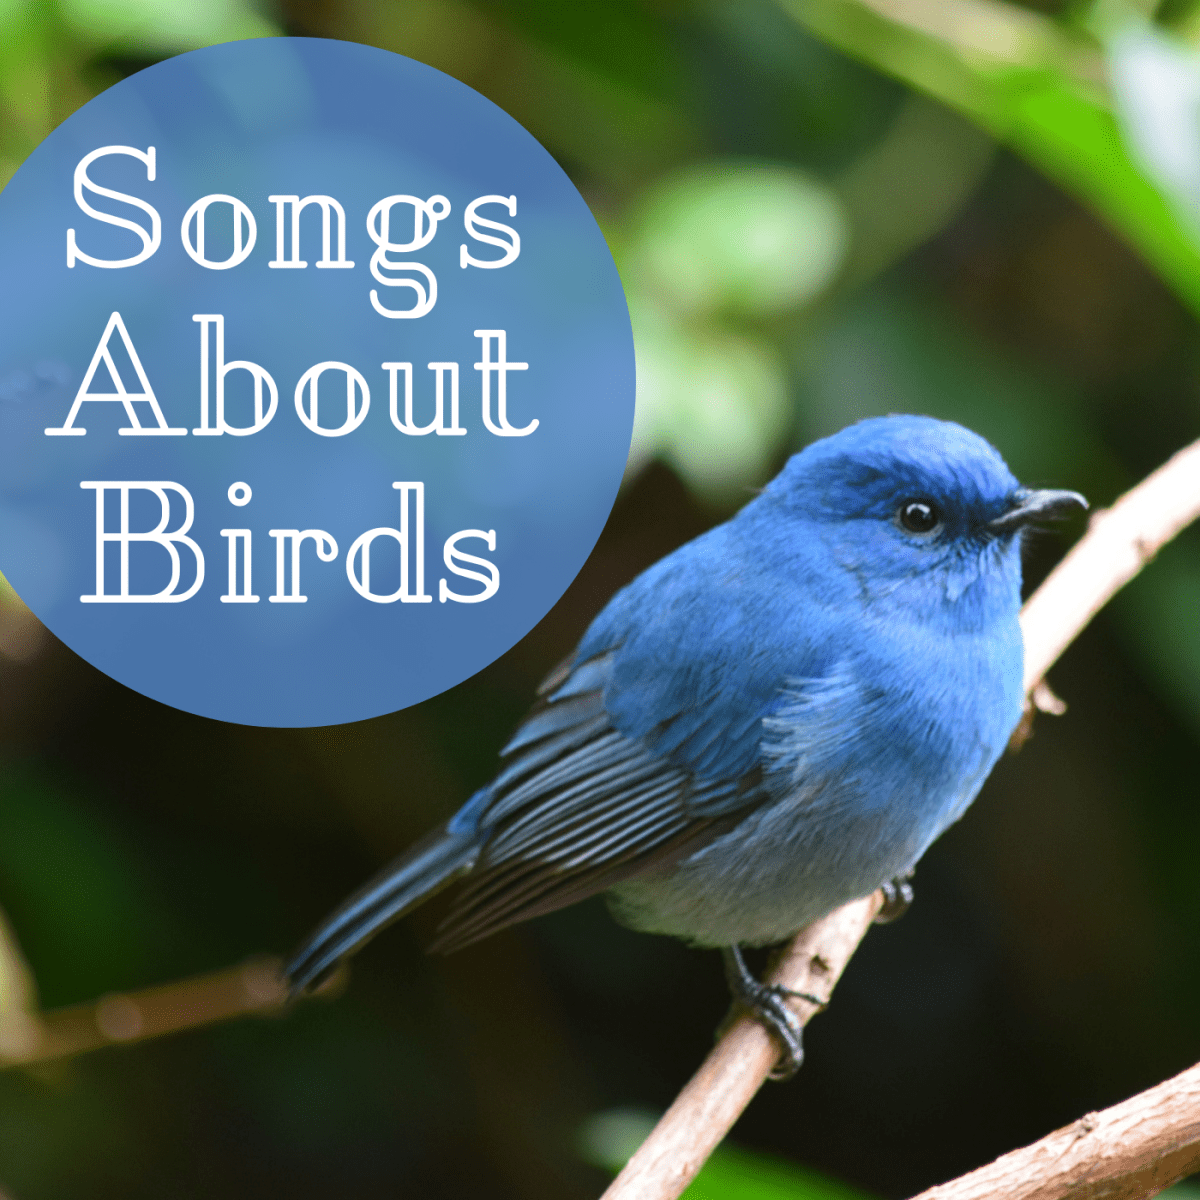 54 Songs About Birds - Spinditty